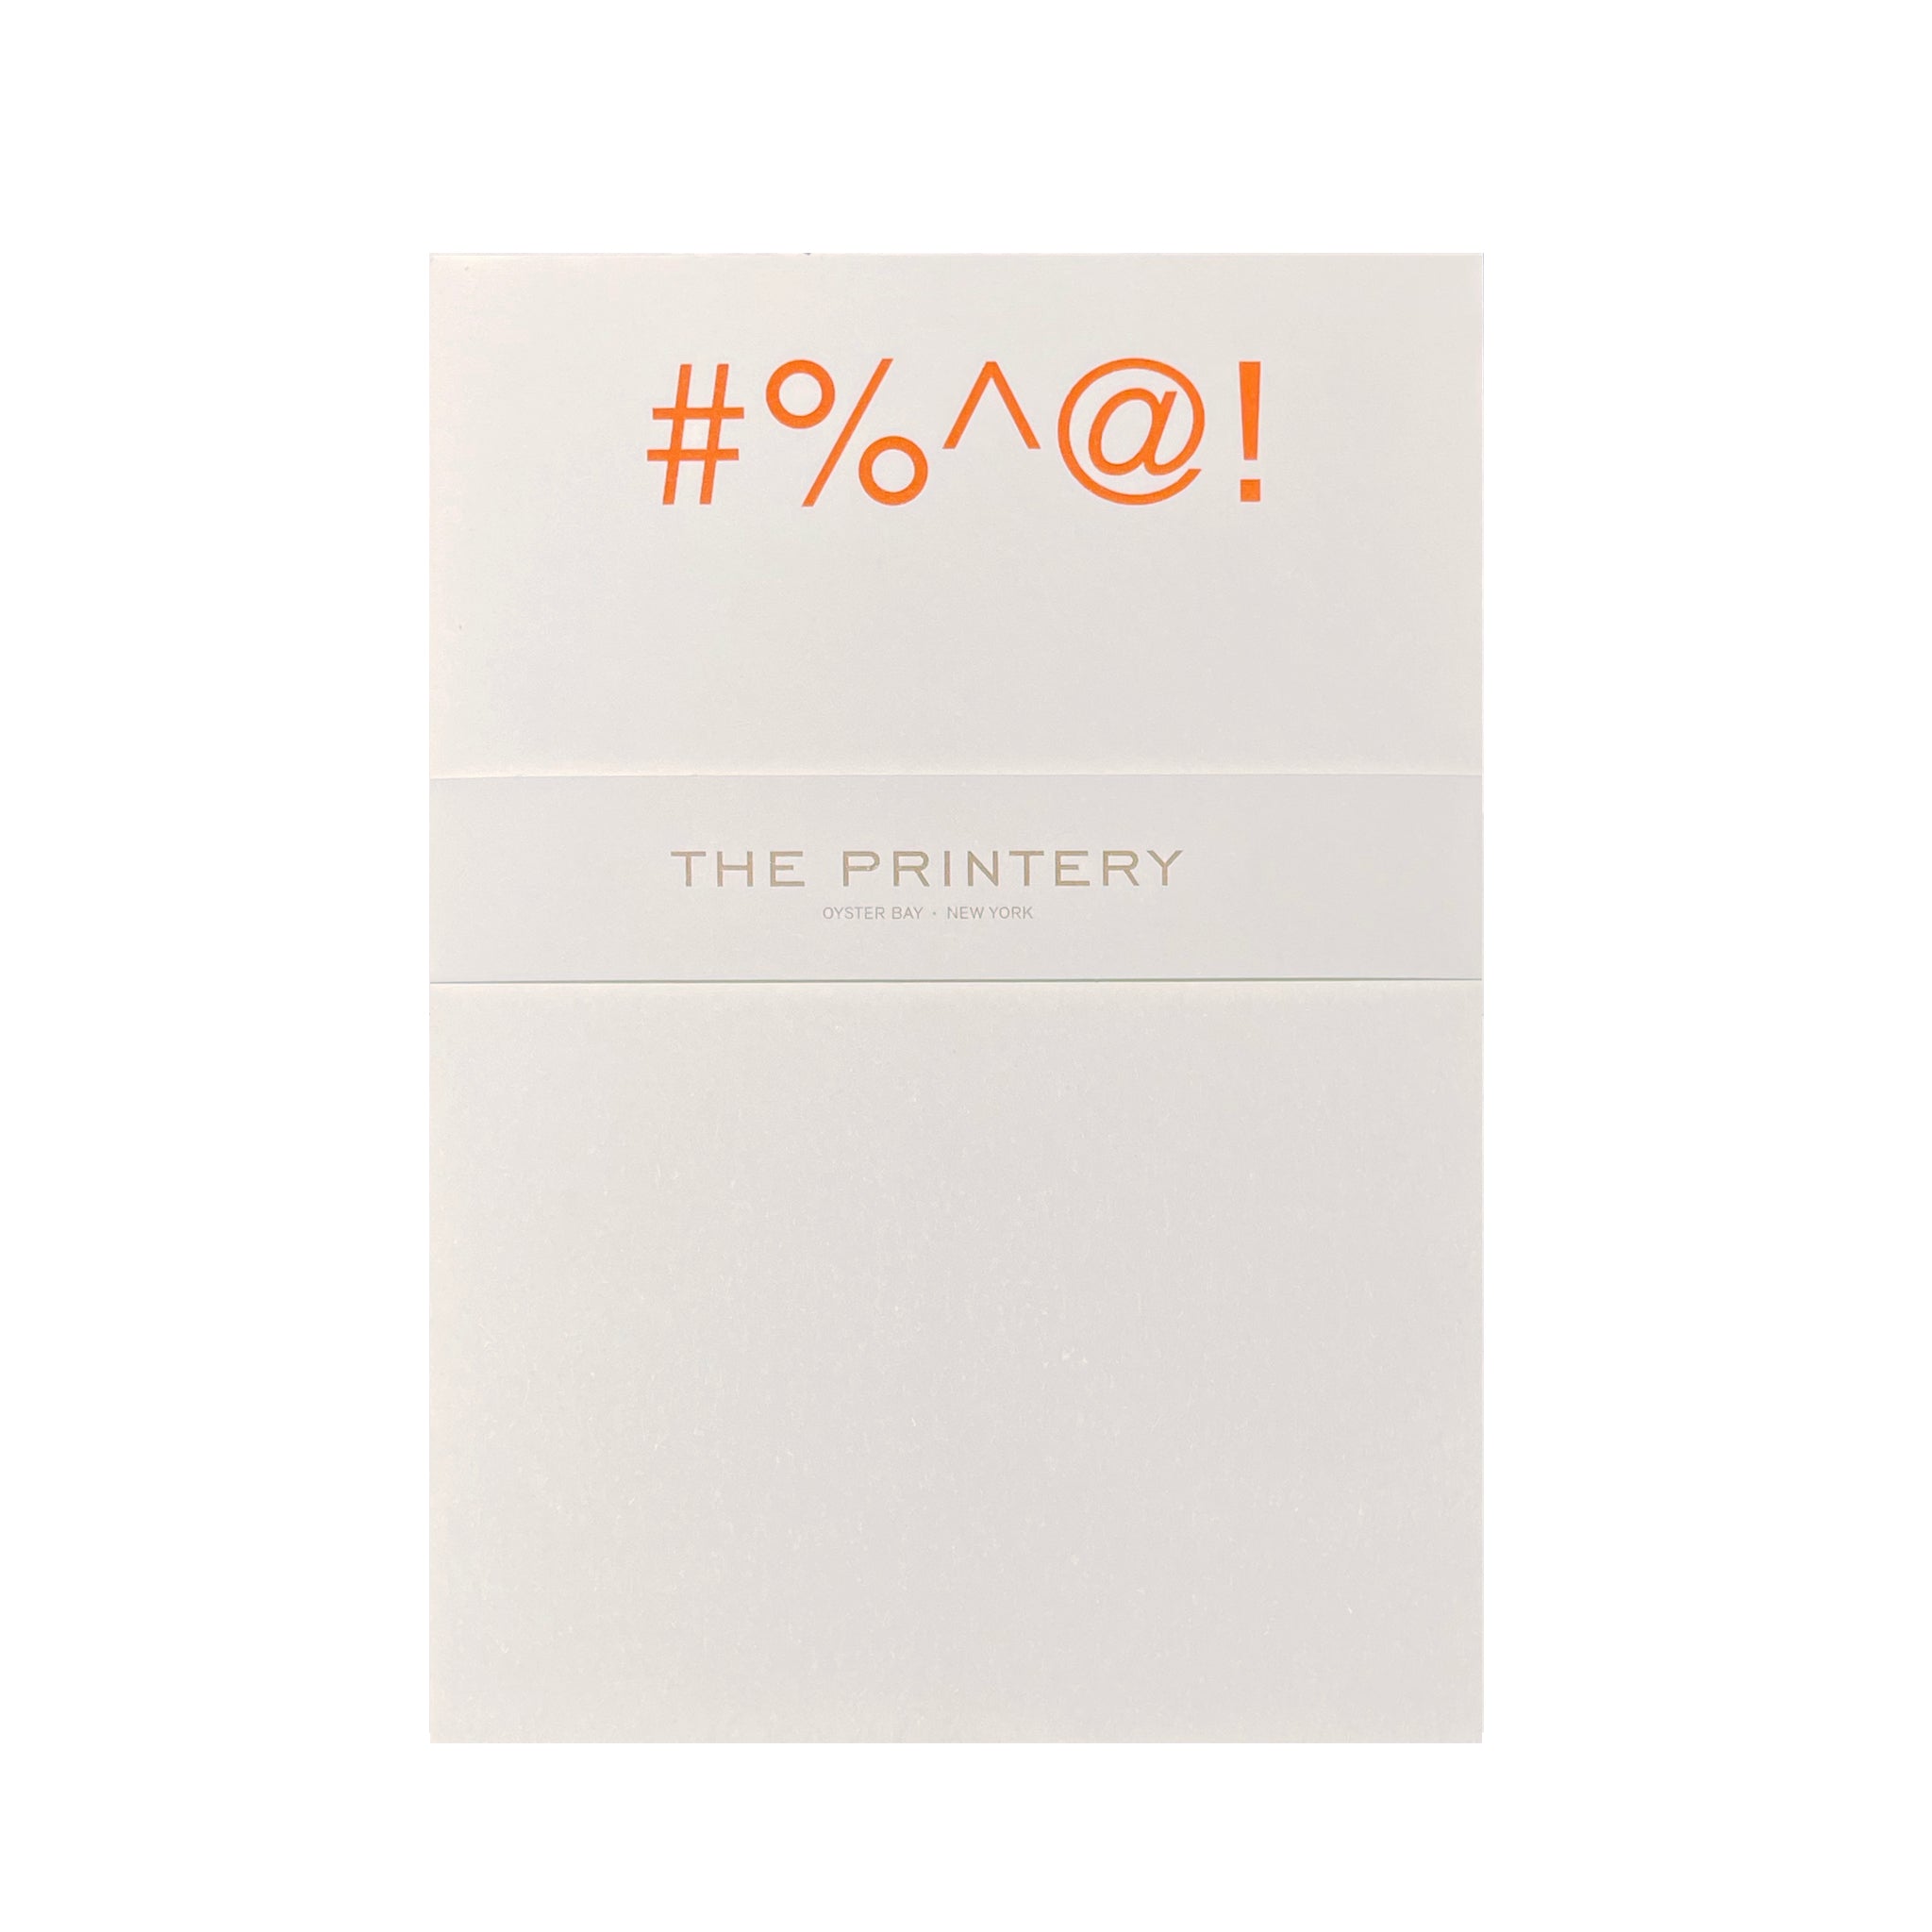 Notepad by The Printery